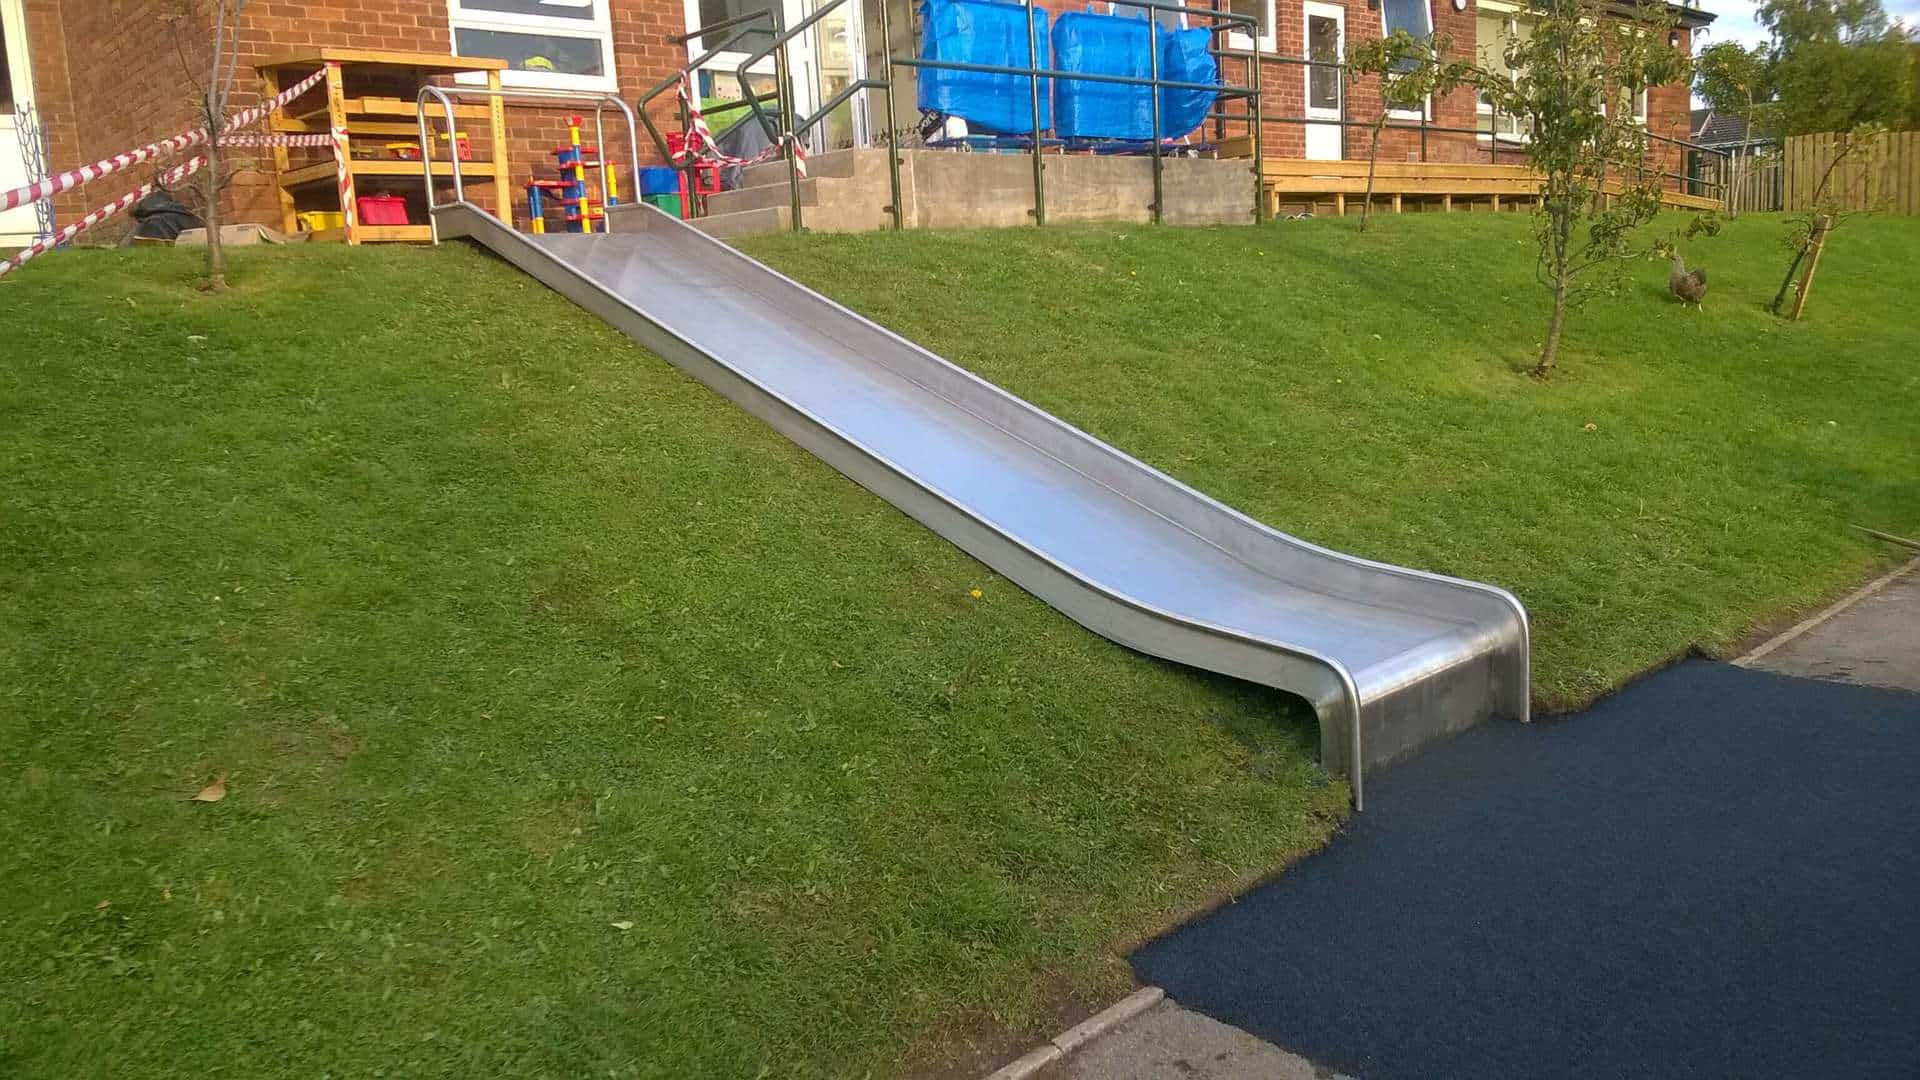 UK Manufacturers Of High Quality Playground Slides